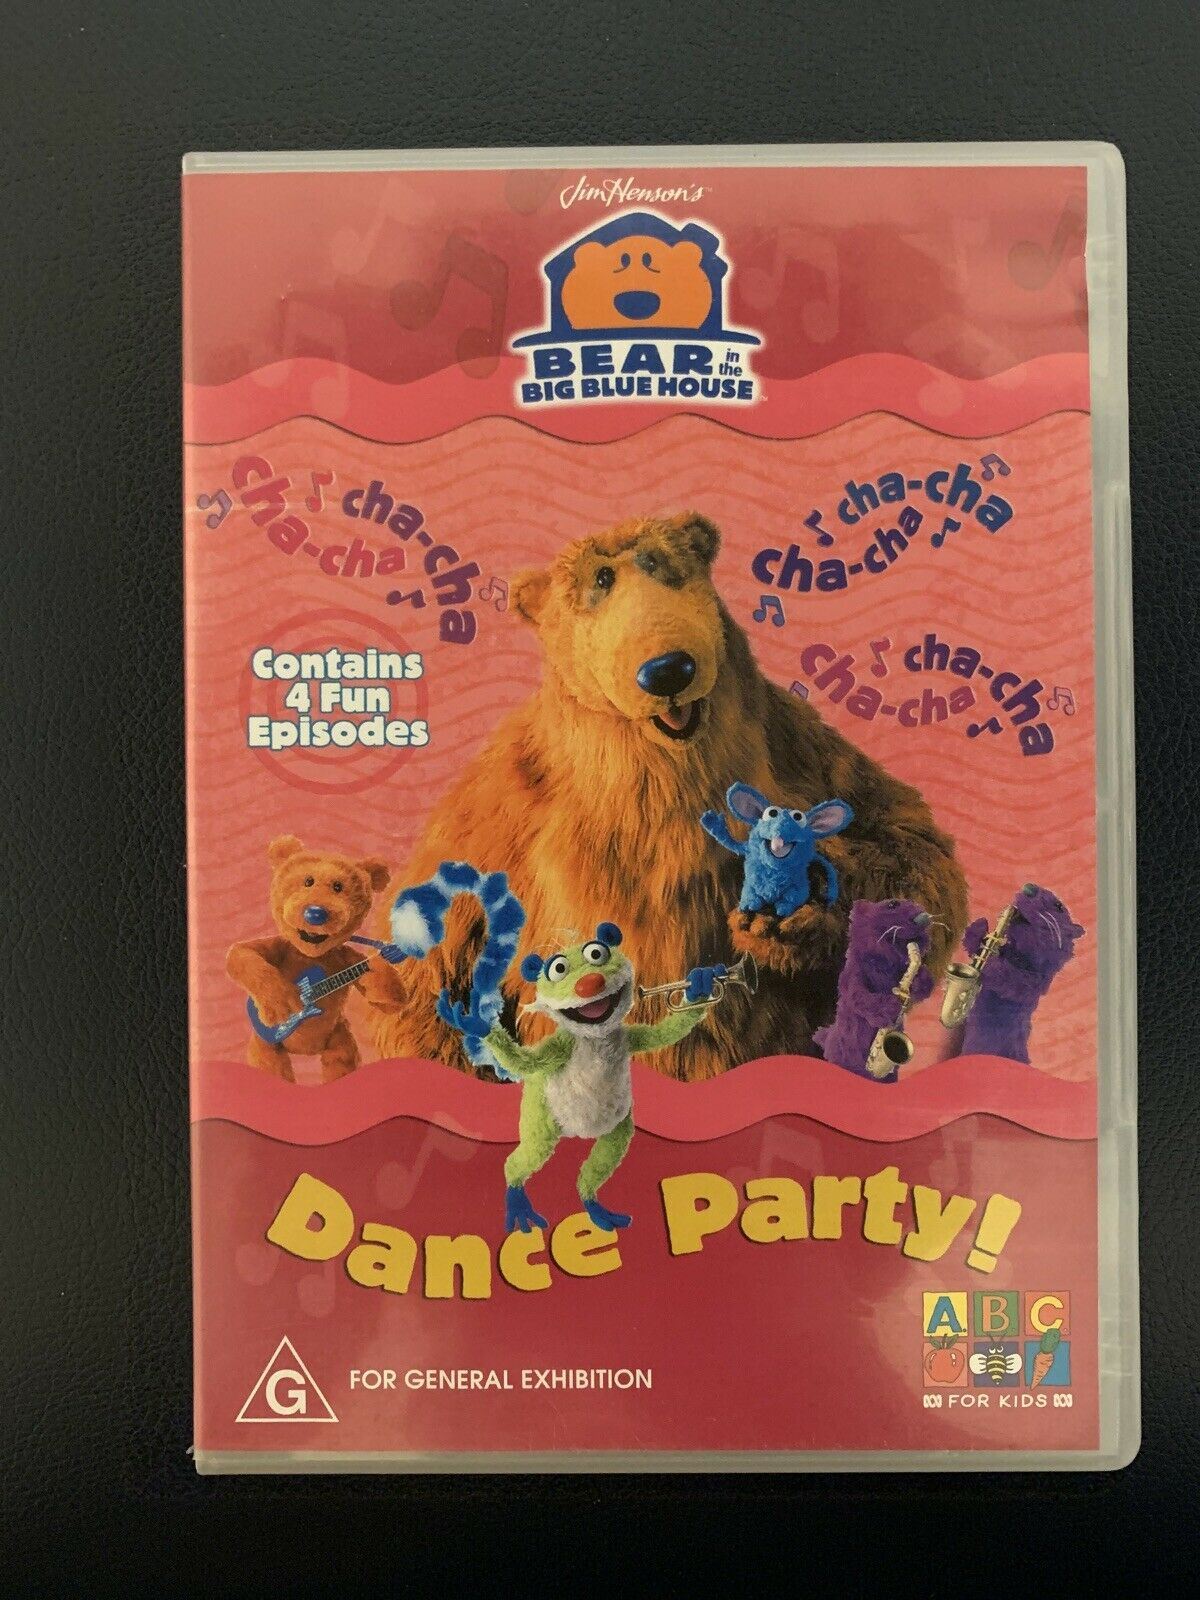 Bear In The Big Blue House - Dance Party (DVD, 2004) Region 4